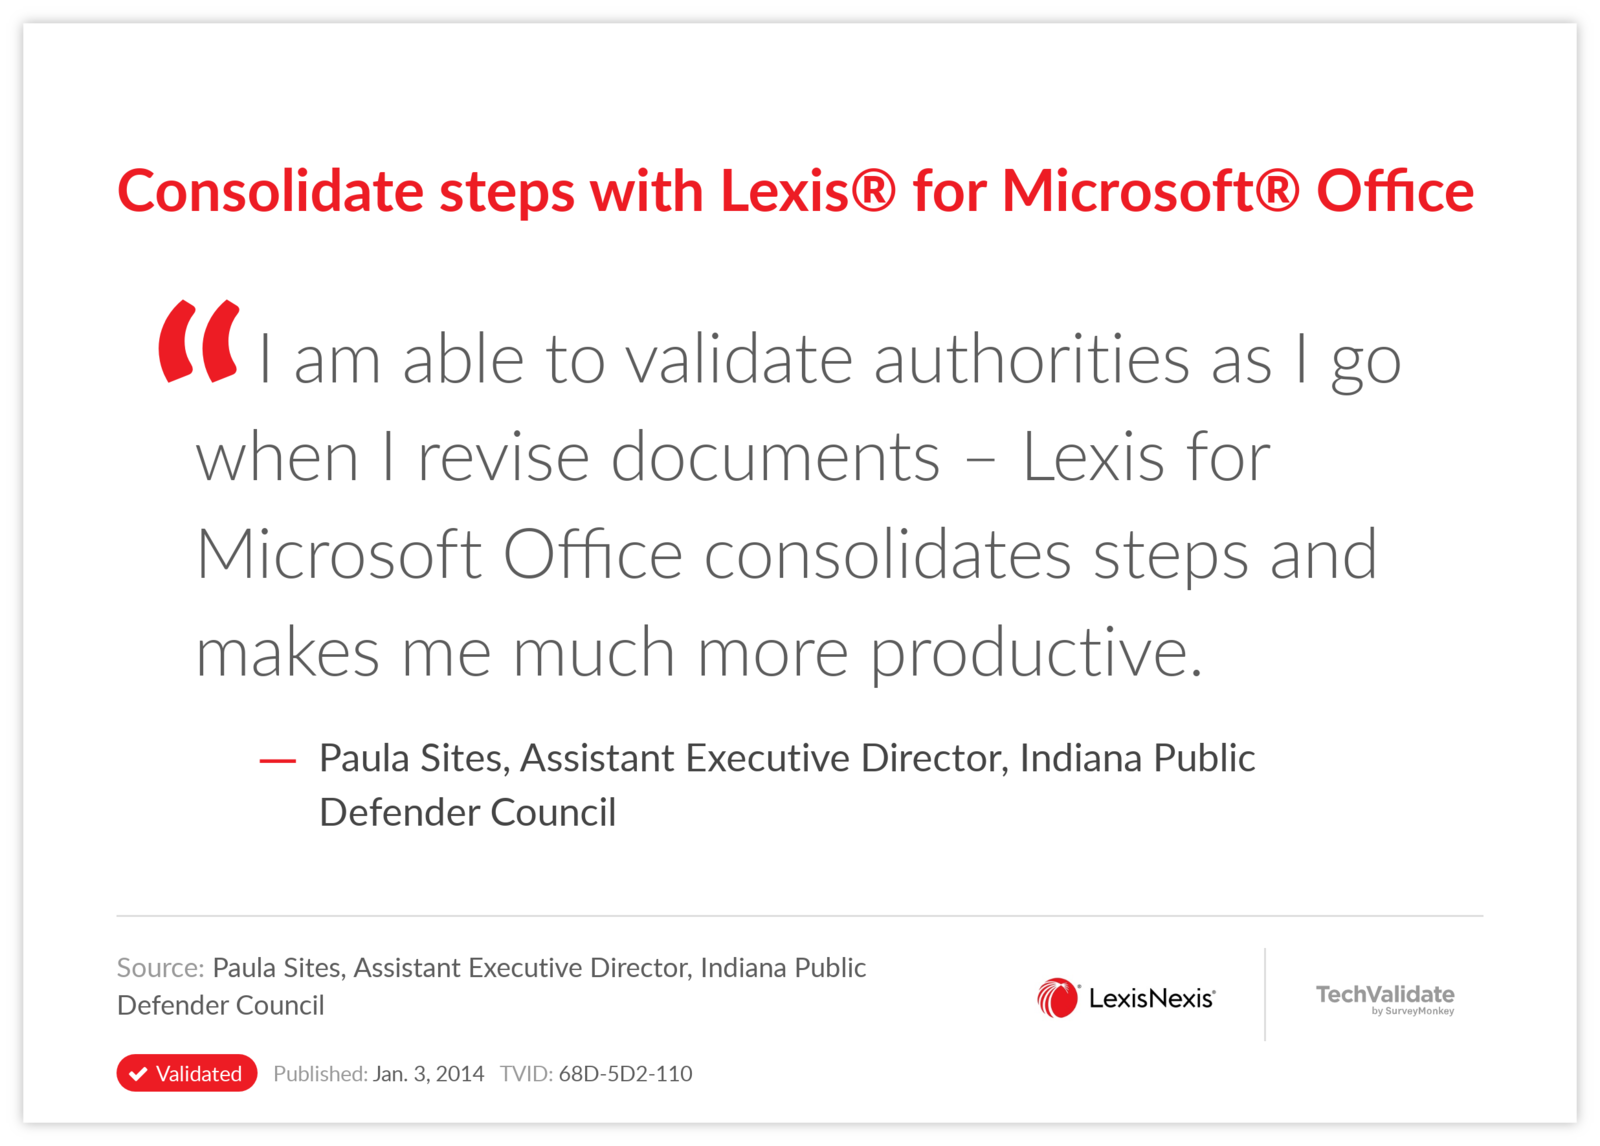 Consolidate steps with Lexis® for Microsoft® Office